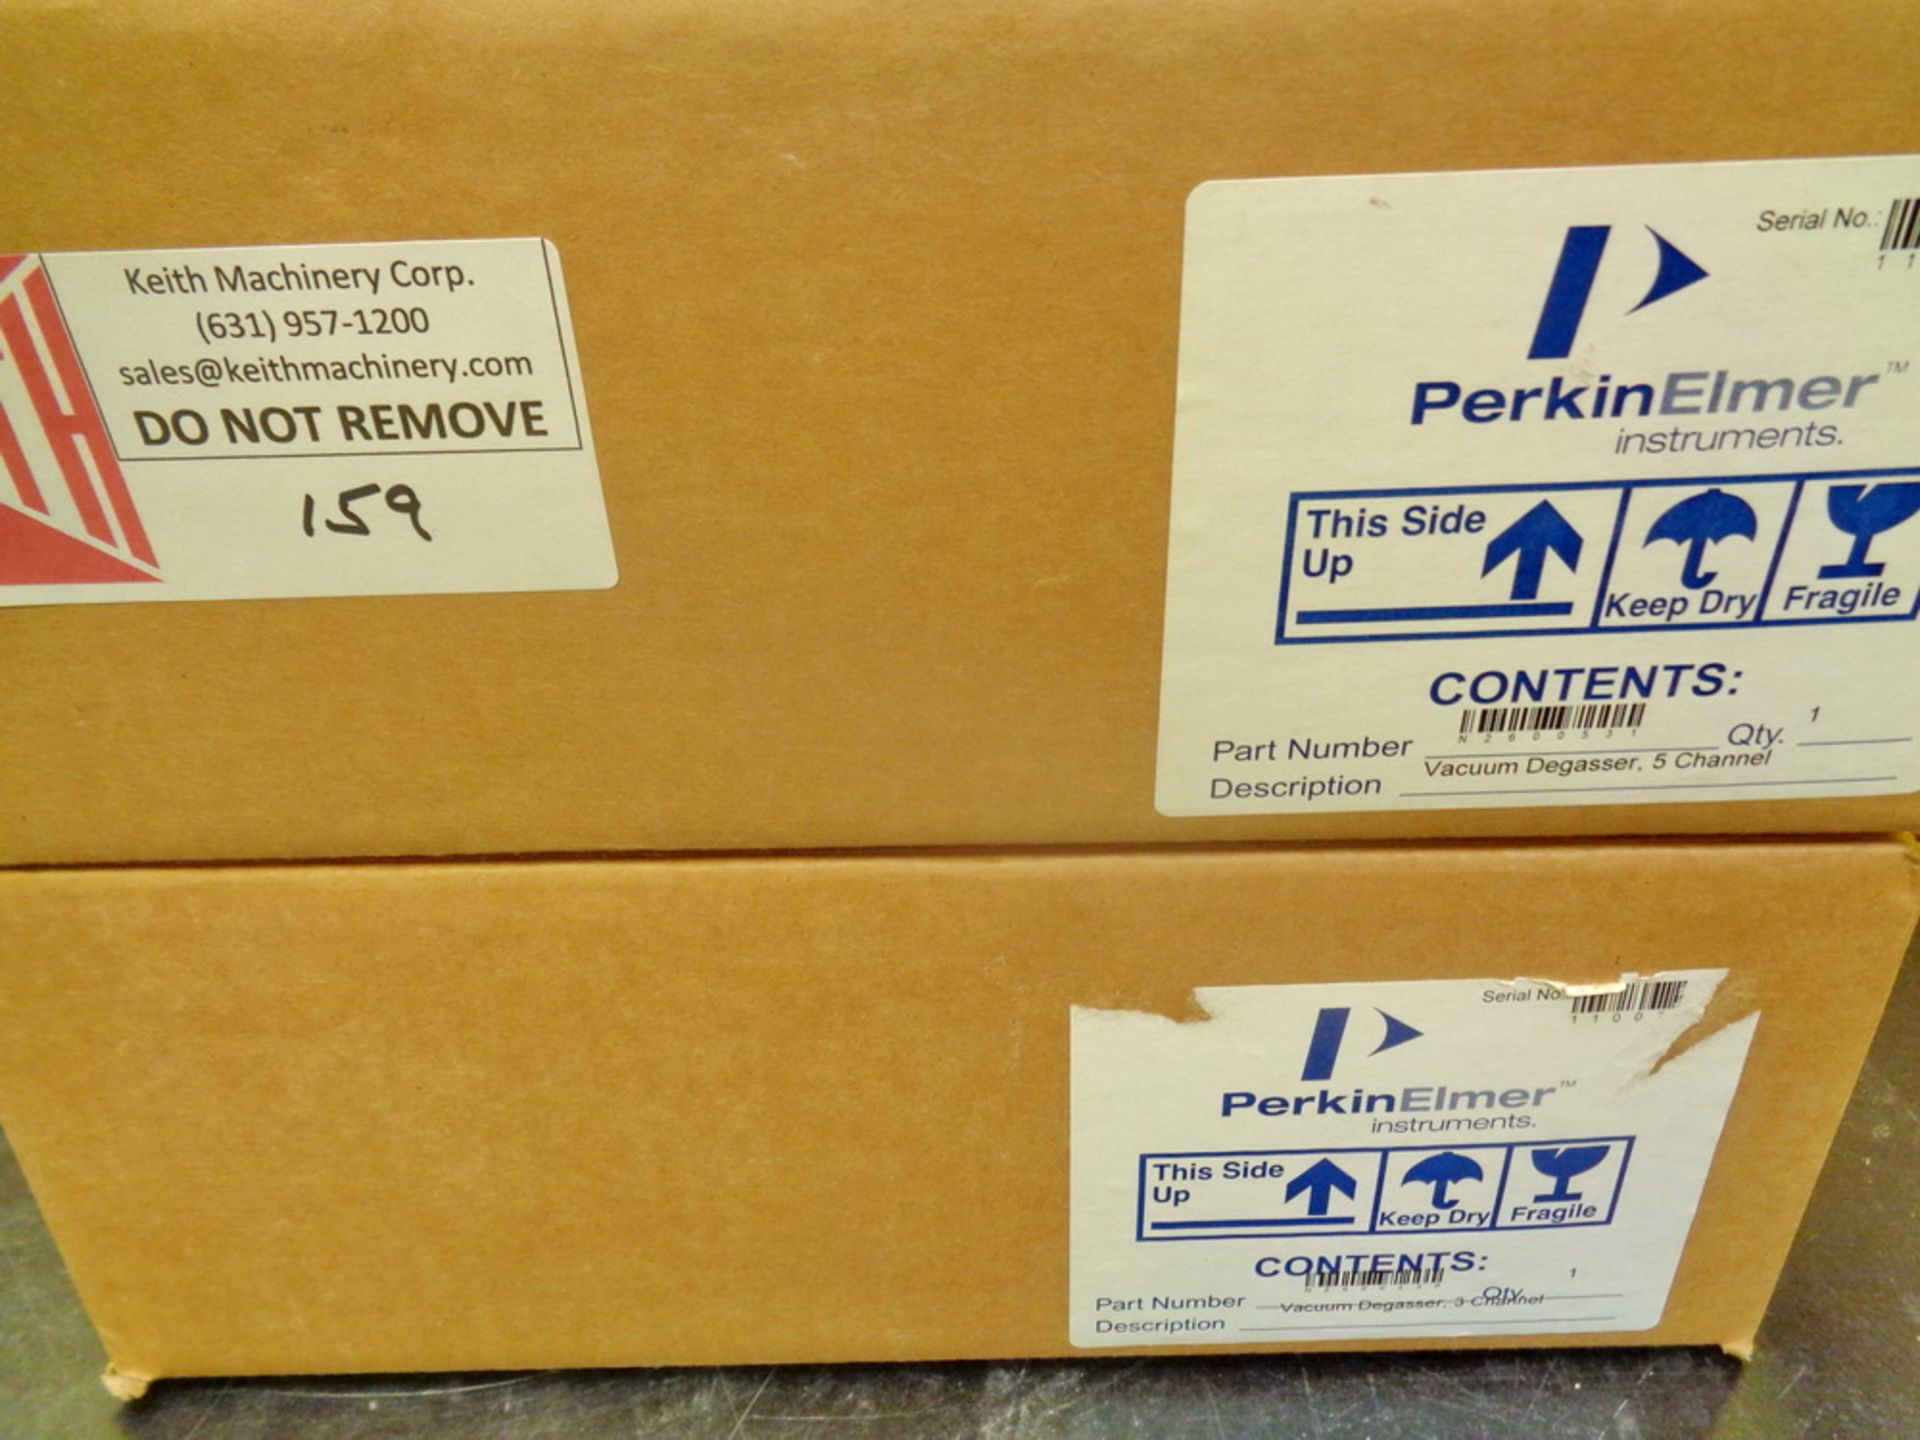 Lot of 2 Boxes, each with an Unused Perkin Elmer Vacuum Degasser